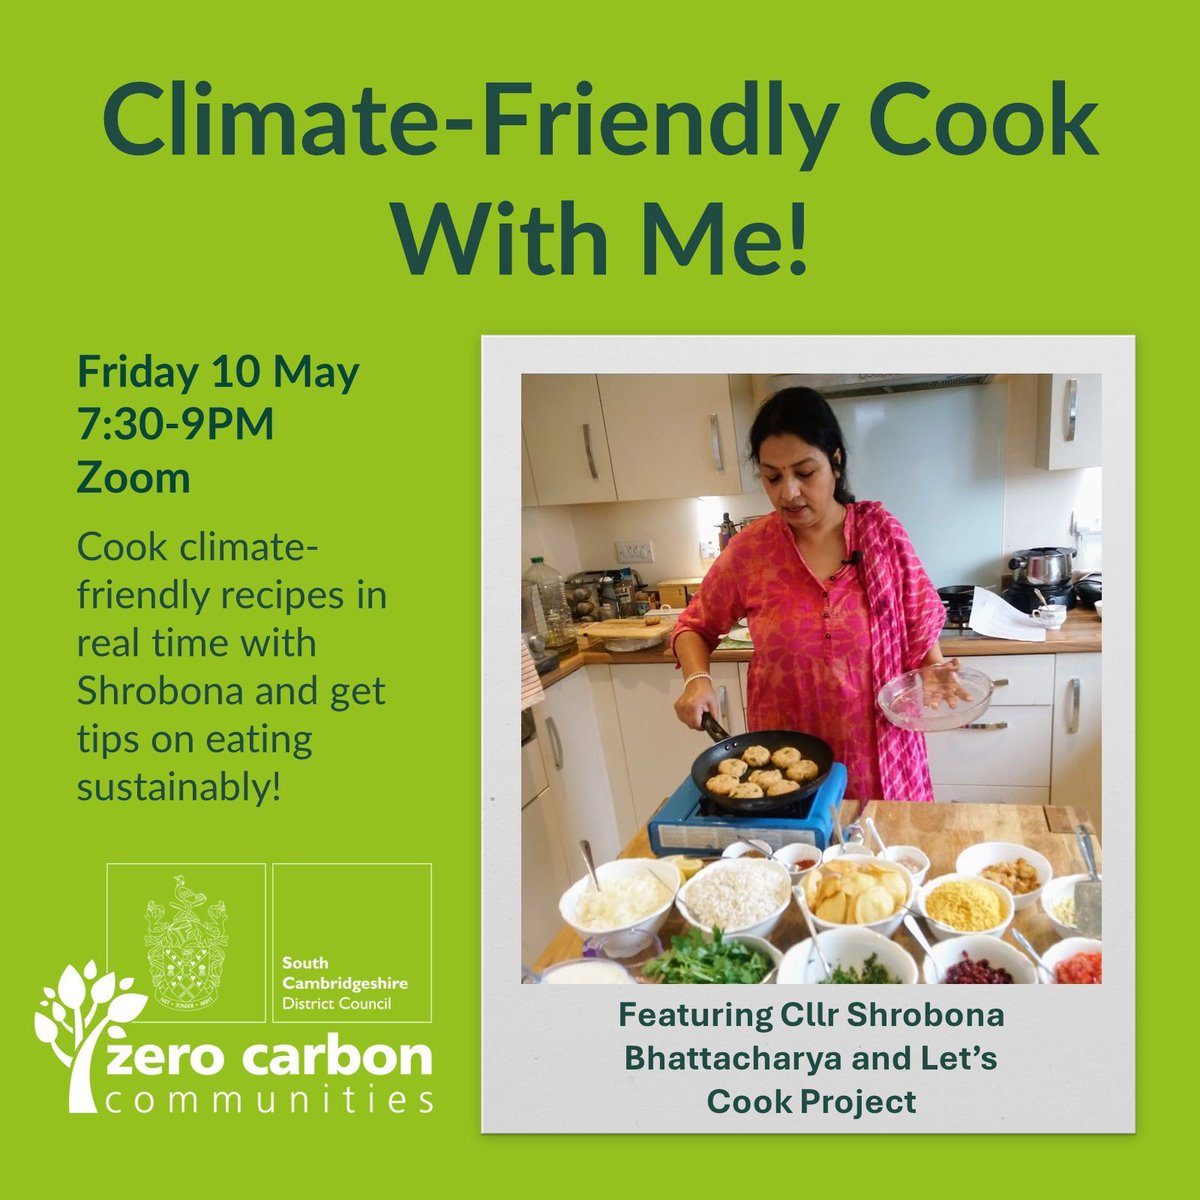 South Cambs Zero Carbon Communities are hosting an interactive cooking event!🧑‍🍳 Join them for a presentation on their work around avoidable food waste, followed by a live cooking demonstration from Cllr Shrobona Bhattacharya. Sign up here: buff.ly/3ULAote @SouthCambs